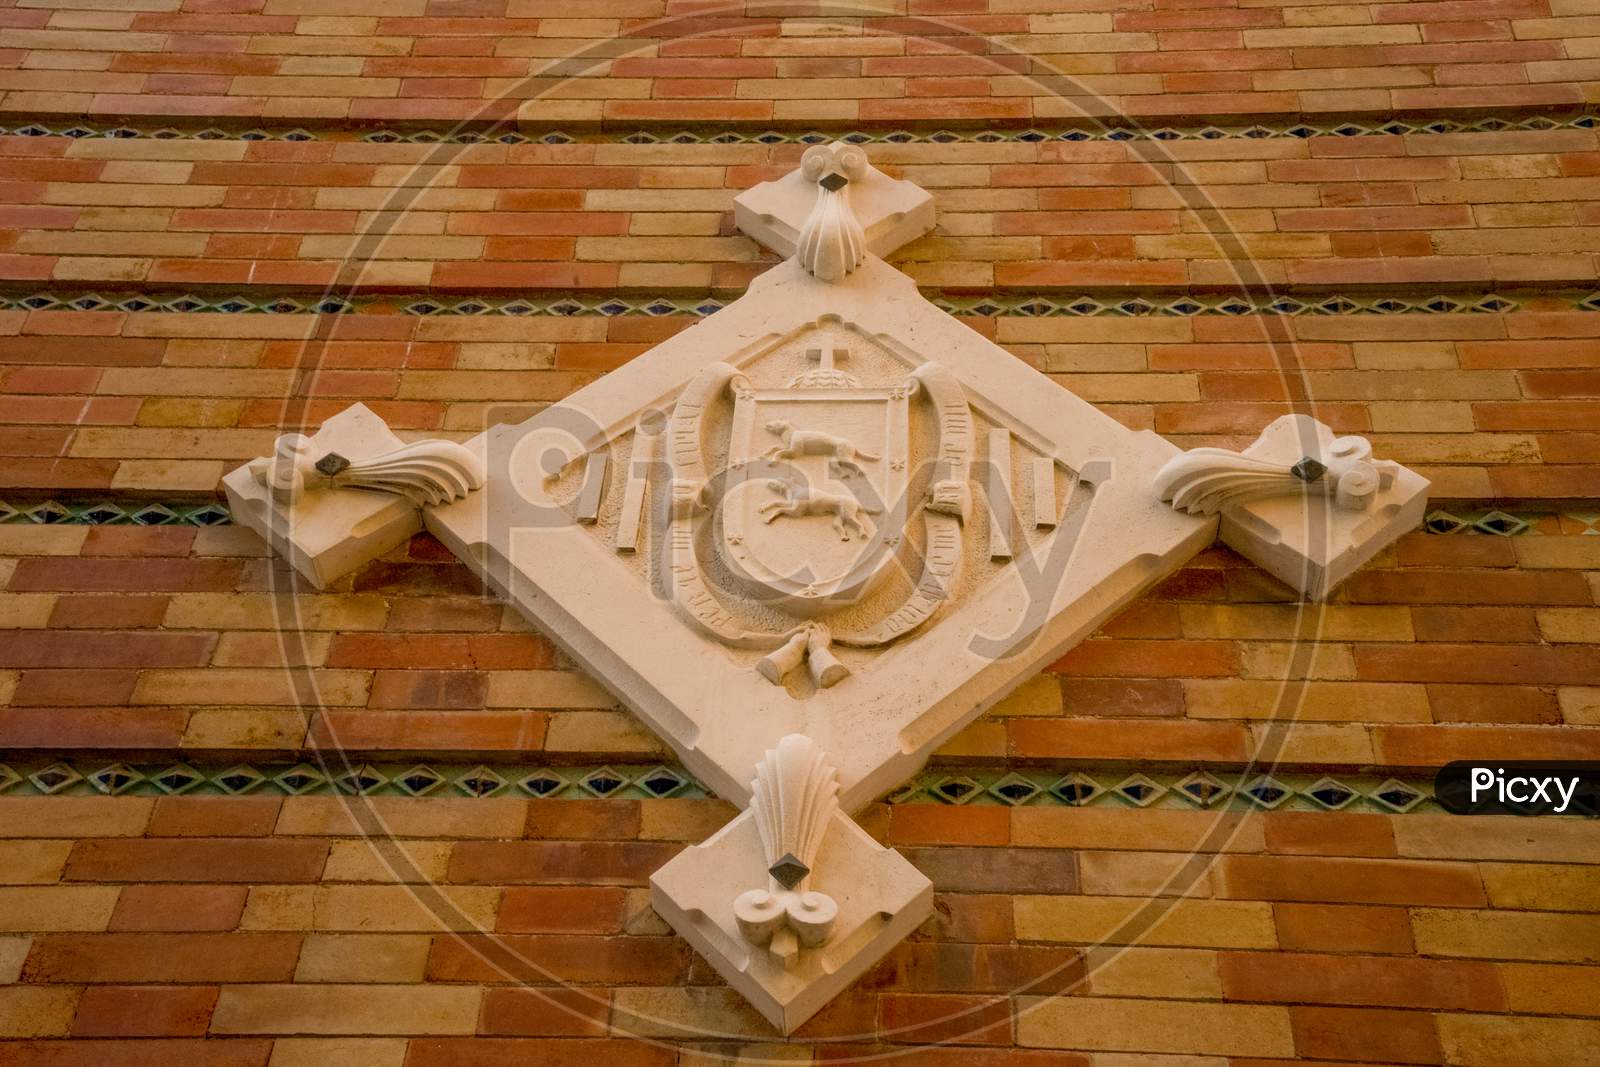 Spain, Malaga - 24 June 2017: The Emblem Of The Cathedral Of Malaga